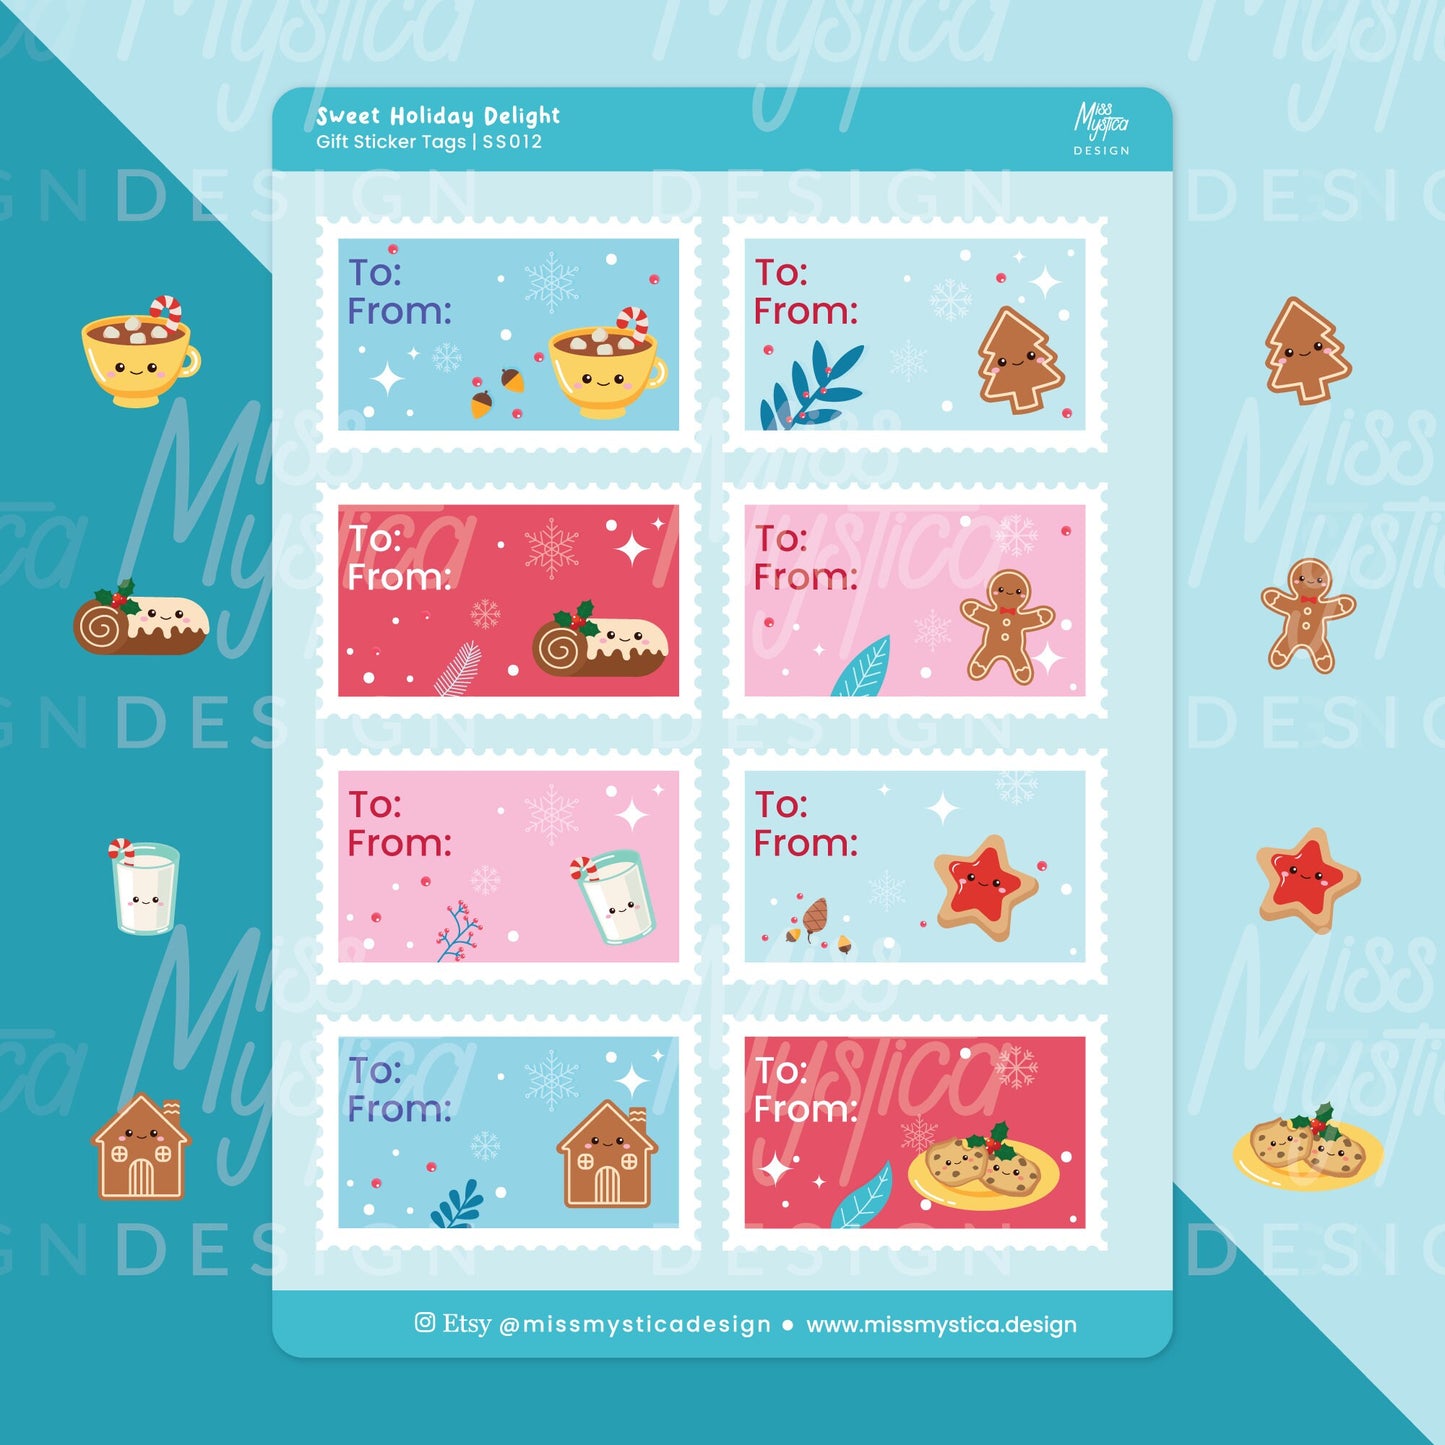 Sweet Holiday Delight Sticker Sheet | Gift Sticker Tags